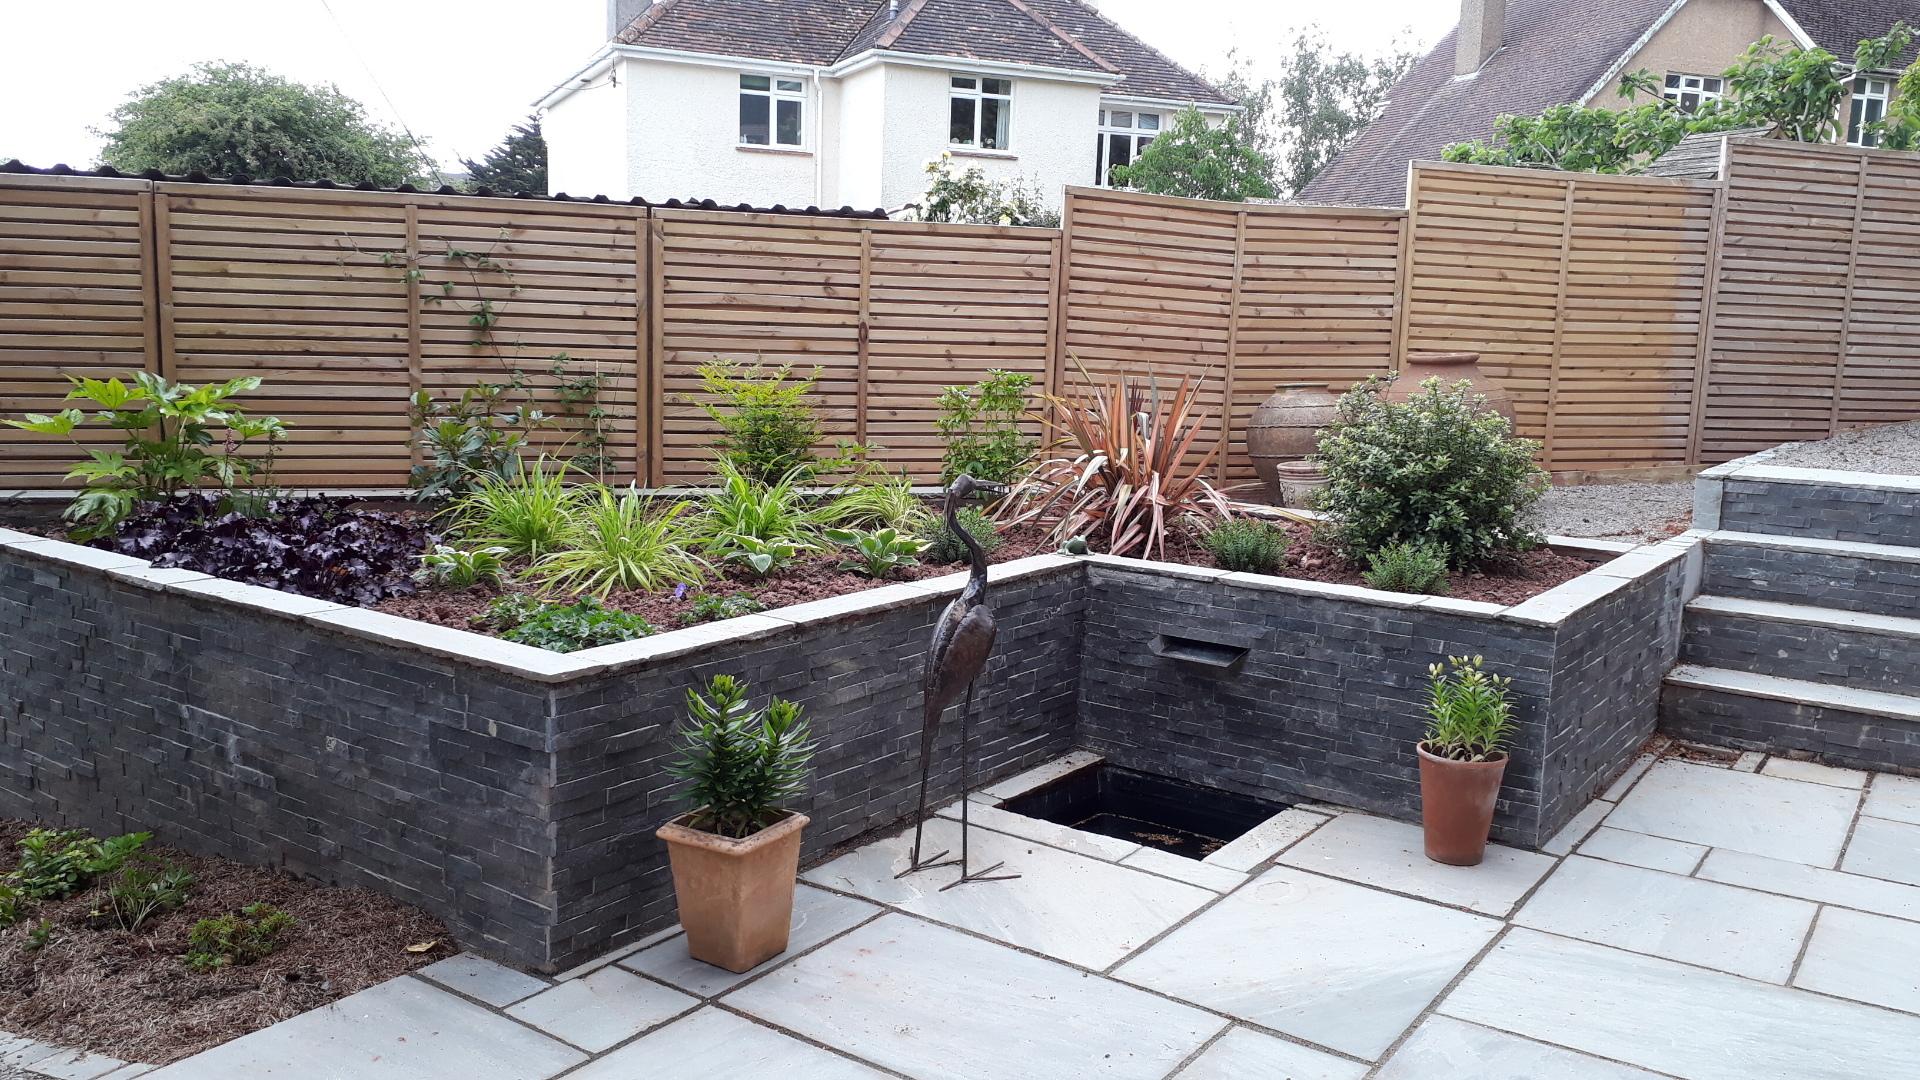 Alison Bockh Garden Design and Landscaping - North Devon - raised beds and leat in upper corner and steps to entrance